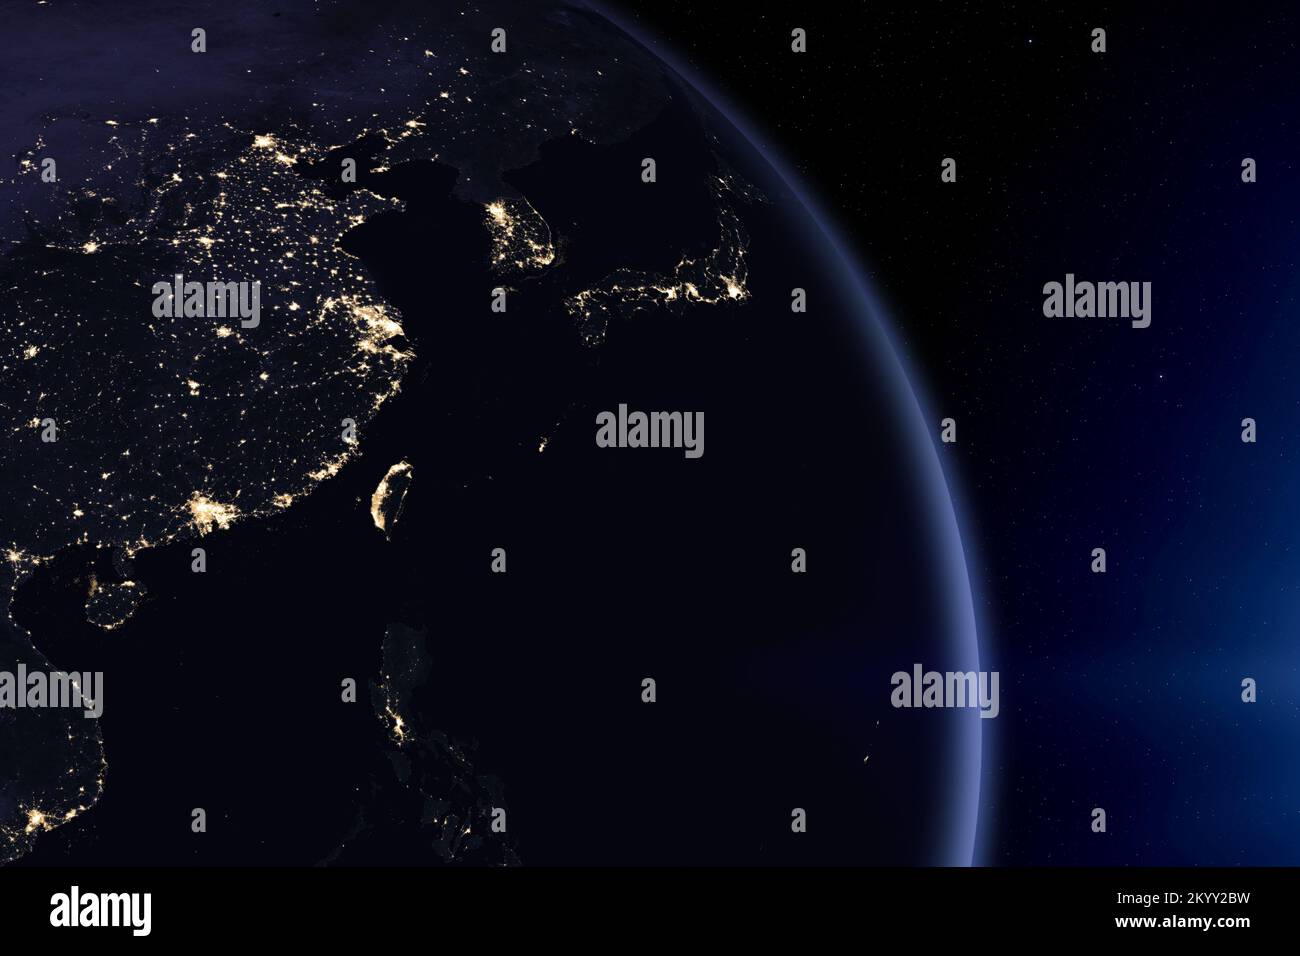 Planet Earth At Night. East Asia at night viewed from space with city lights. Mongolia, China, Japan, South Korea. Elements furnished by NASA. Stock Photo